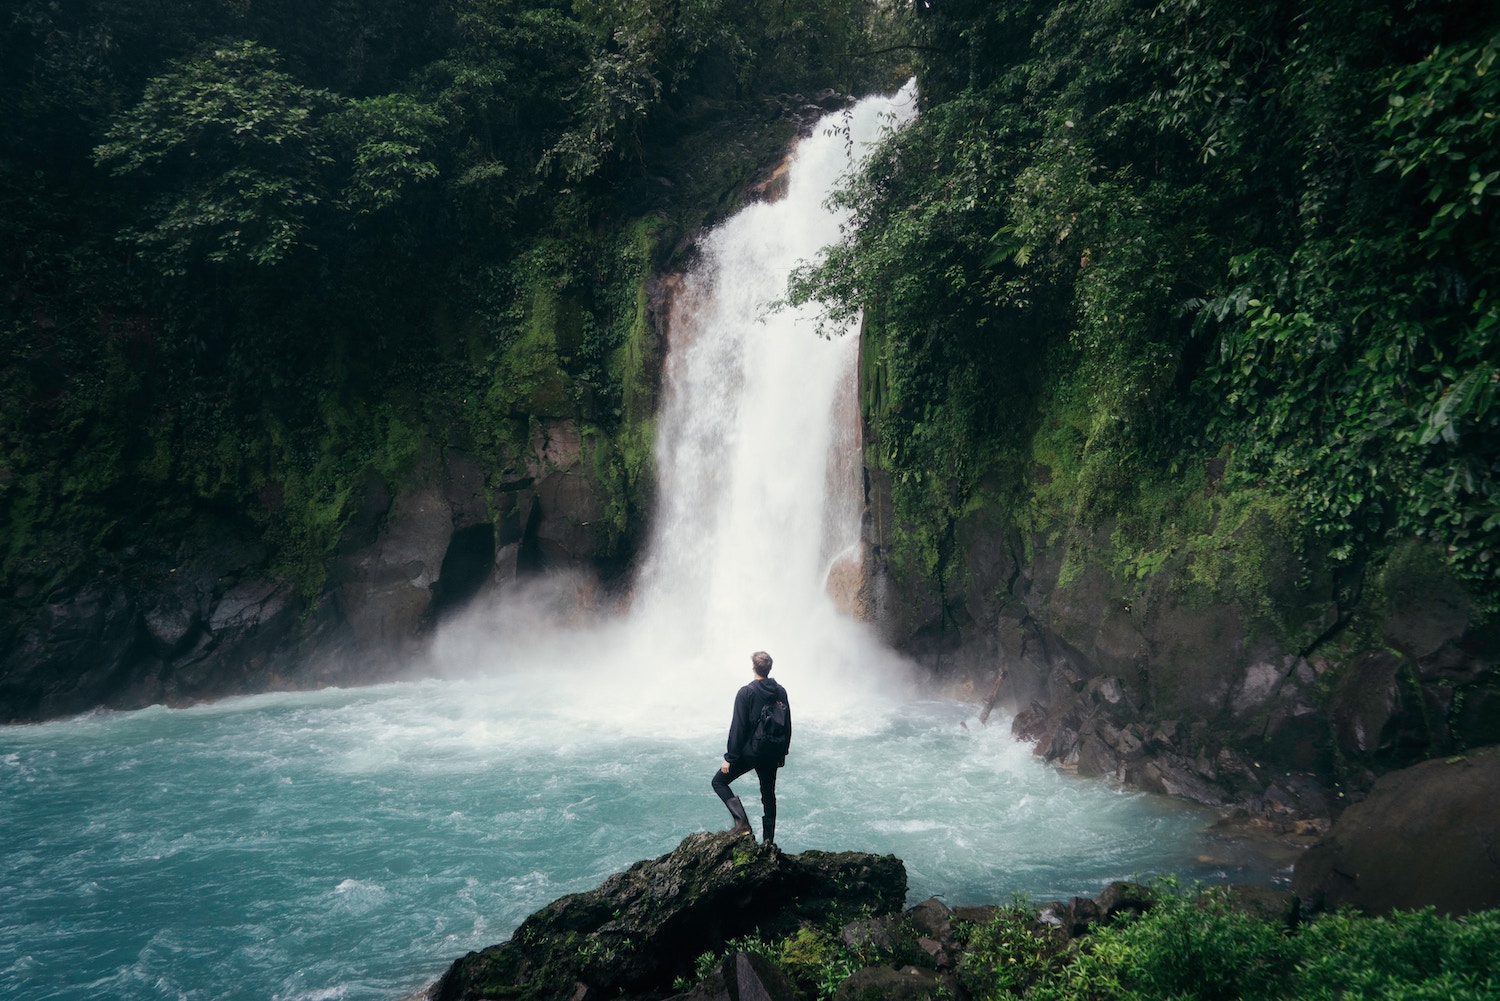 Backpacker Free Activities to Waterfall - How to Travel on a Budget